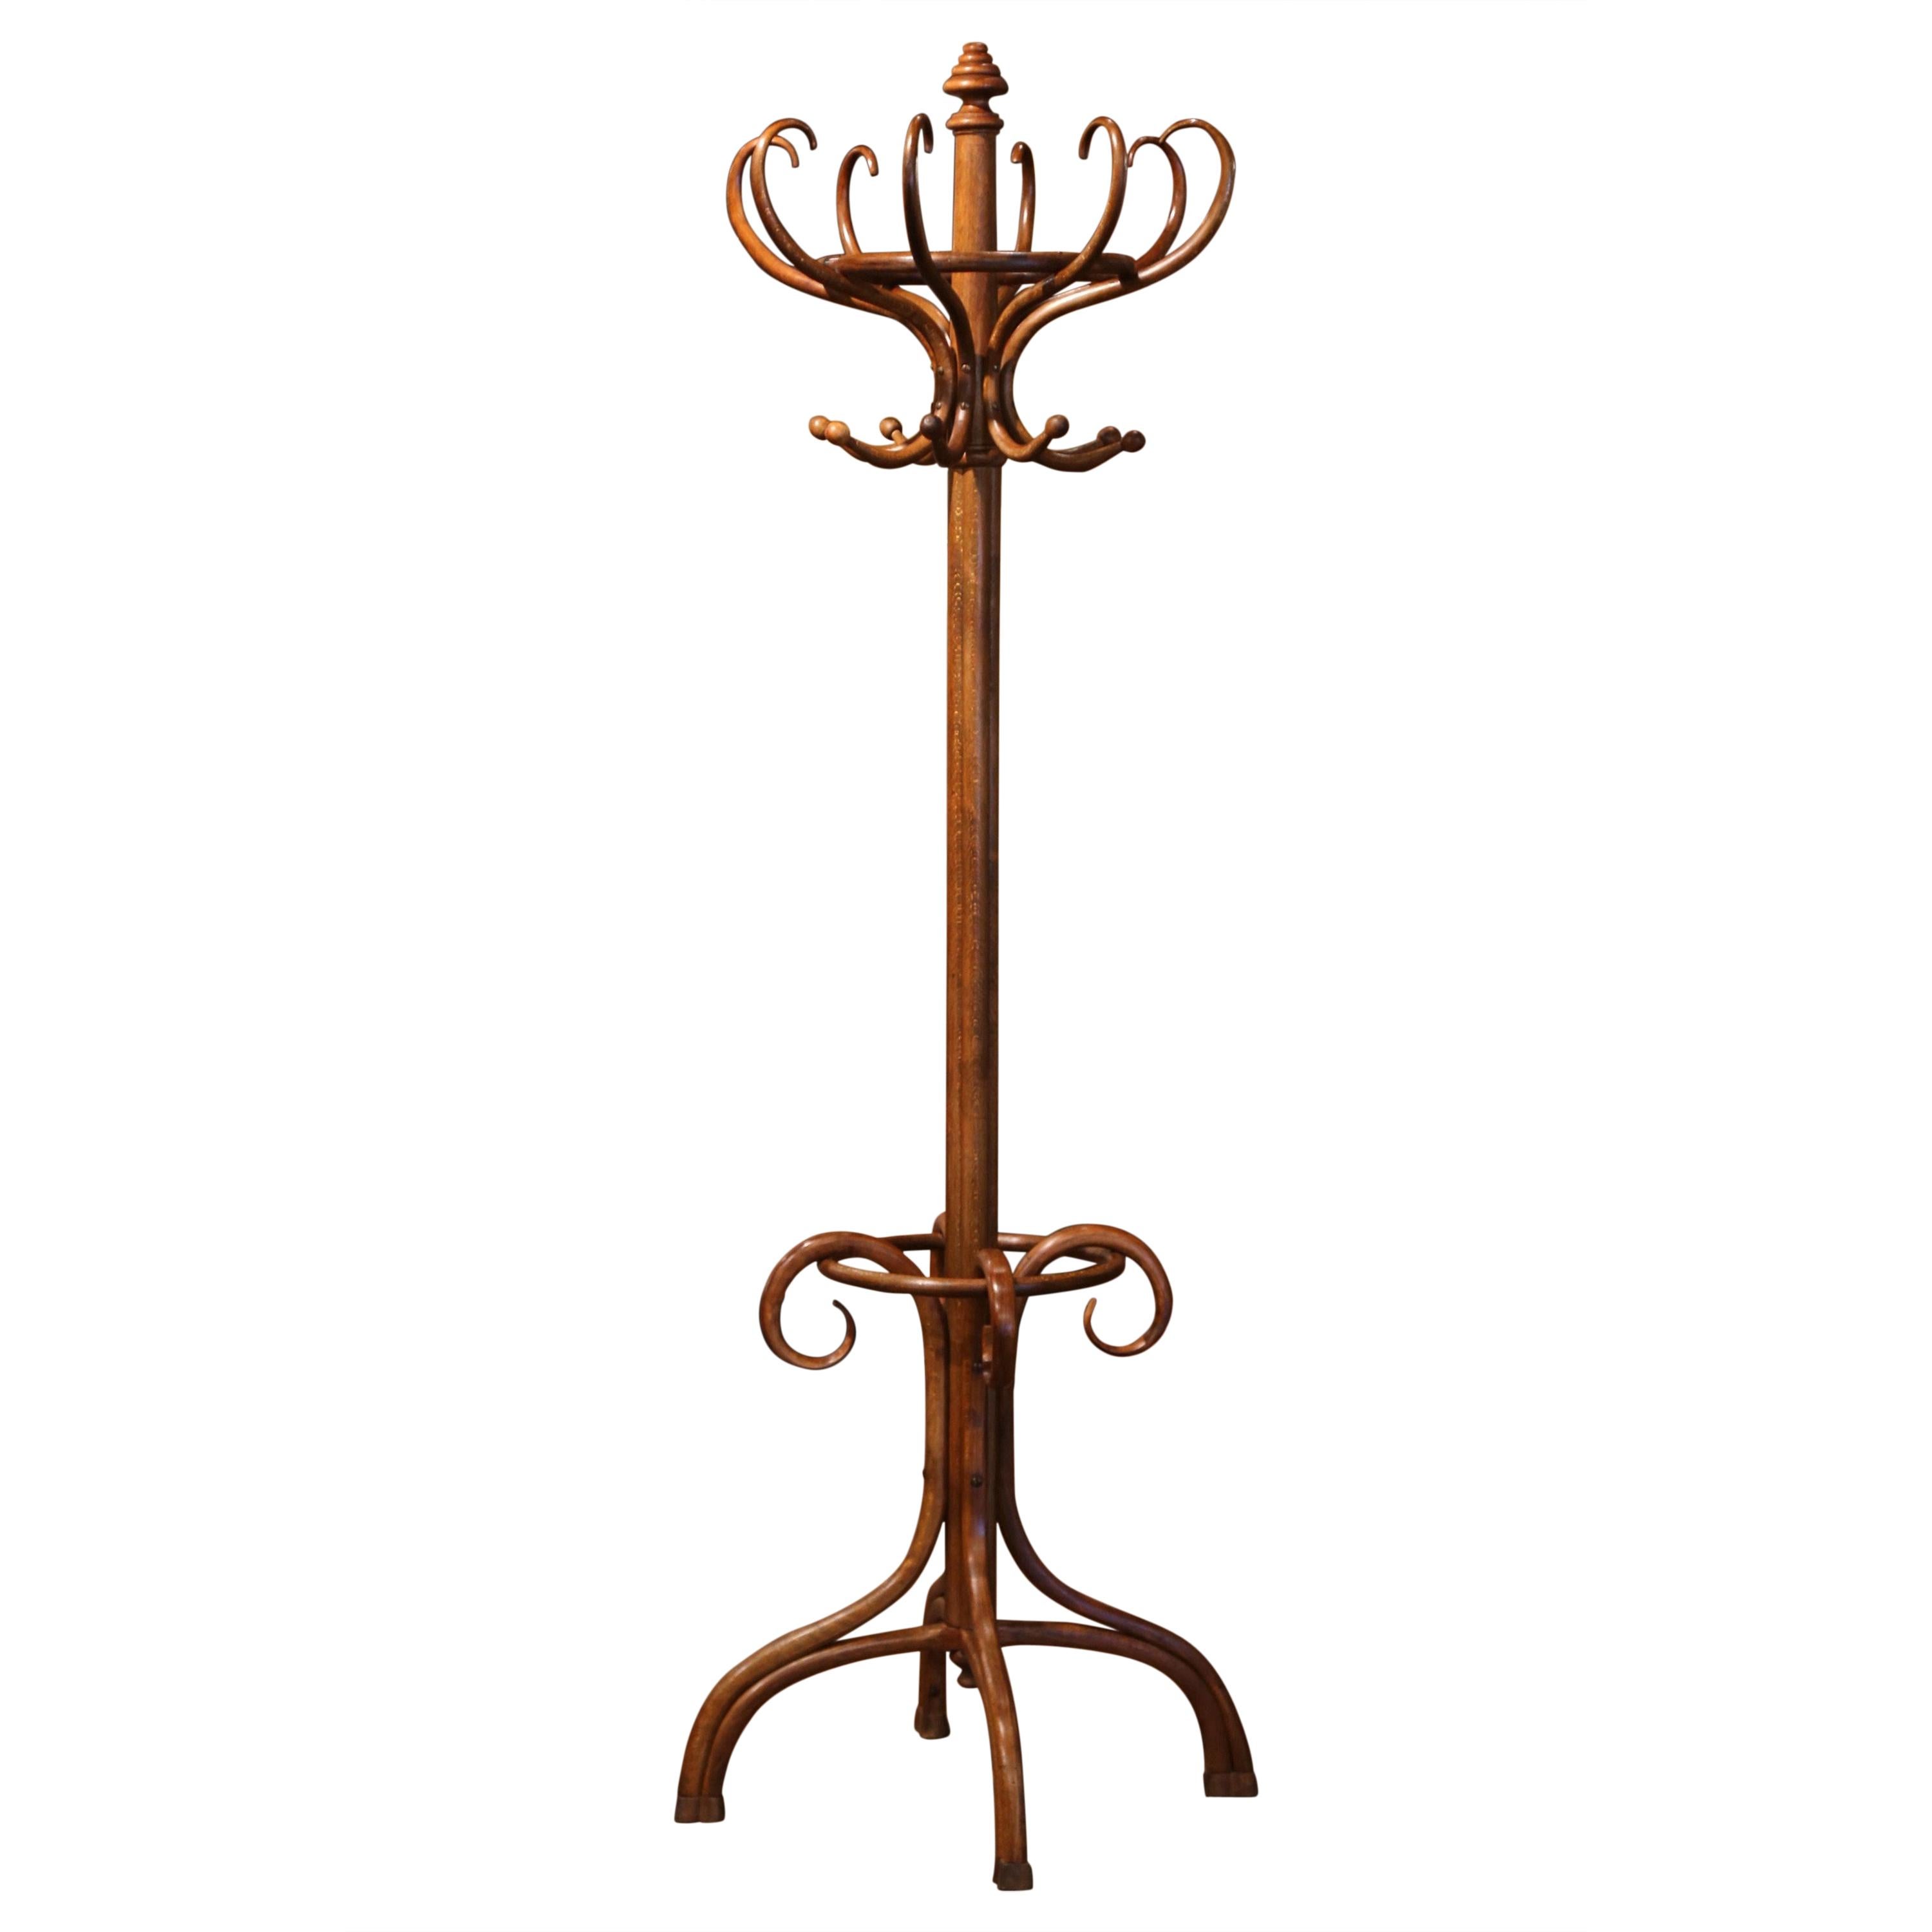 Mid-20th Century French Bentwood Coat Stand or Hat Rack Thonet Style